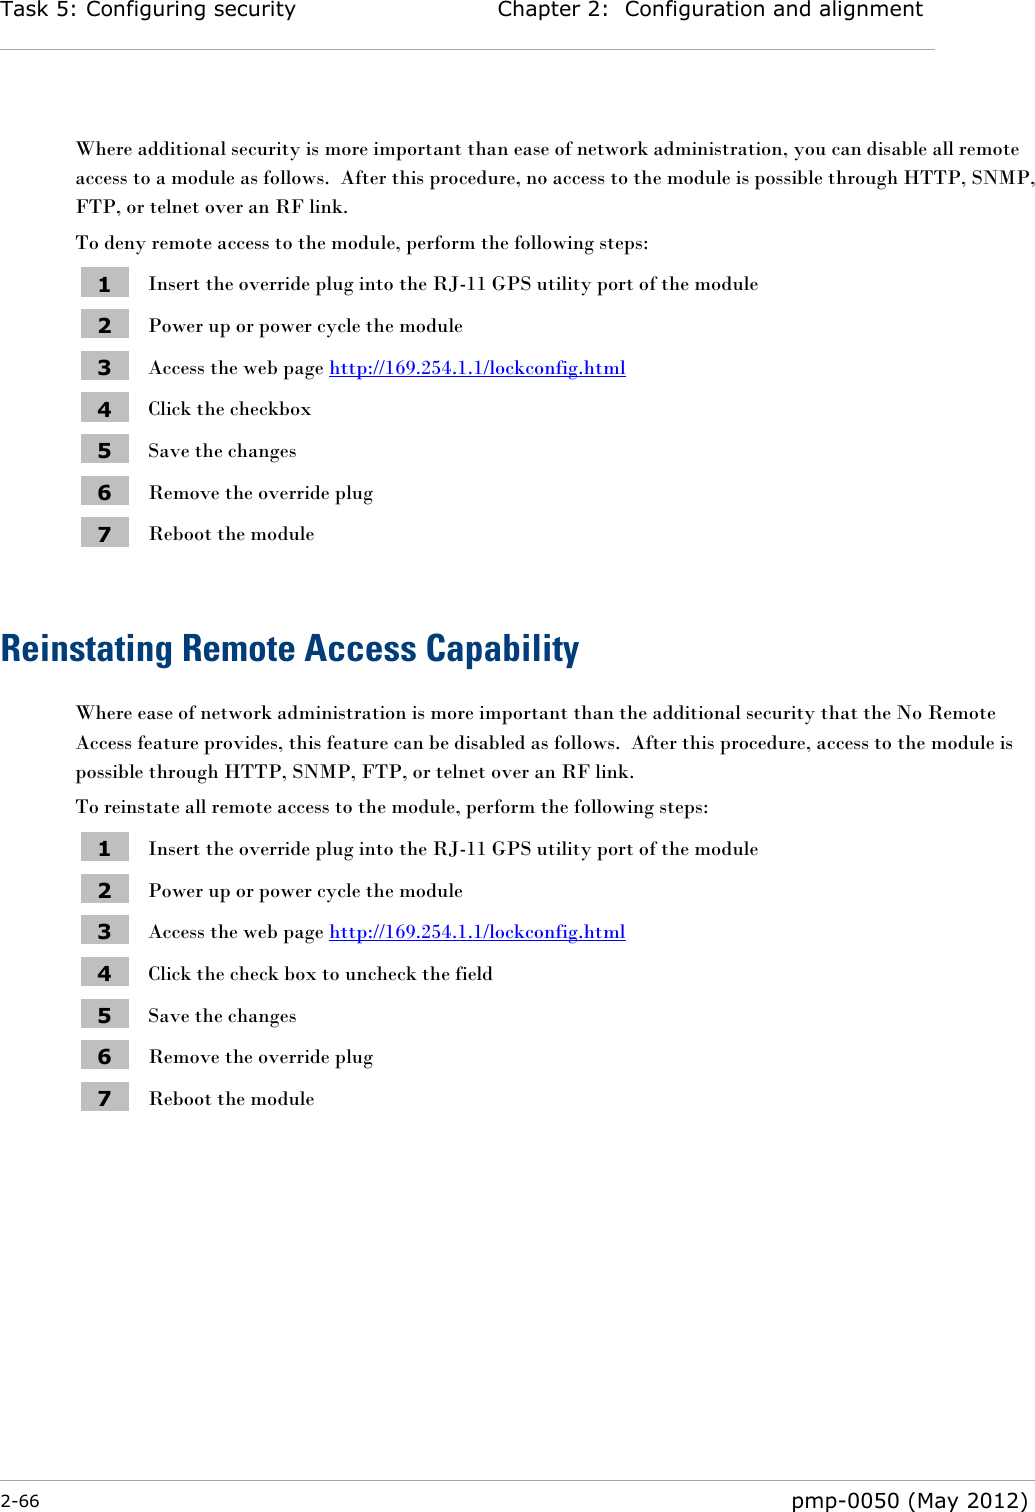 Task 5: Configuring security Chapter 2:  Configuration and alignment  2-66  pmp-0050 (May 2012)   Where additional security is more important than ease of network administration, you can disable all remote access to a module as follows.  After this procedure, no access to the module is possible through HTTP, SNMP, FTP, or telnet over an RF link. To deny remote access to the module, perform the following steps: 1 Insert the override plug into the RJ-11 GPS utility port of the module 2 Power up or power cycle the module 3 Access the web page http://169.254.1.1/lockconfig.html 4 Click the checkbox 5 Save the changes 6 Remove the override plug 7 Reboot the module  Reinstating Remote Access Capability Where ease of network administration is more important than the additional security that the No Remote Access feature provides, this feature can be disabled as follows.  After this procedure, access to the module is possible through HTTP, SNMP, FTP, or telnet over an RF link. To reinstate all remote access to the module, perform the following steps: 1 Insert the override plug into the RJ-11 GPS utility port of the module 2 Power up or power cycle the module 3 Access the web page http://169.254.1.1/lockconfig.html 4 Click the check box to uncheck the field 5 Save the changes 6 Remove the override plug 7 Reboot the module 